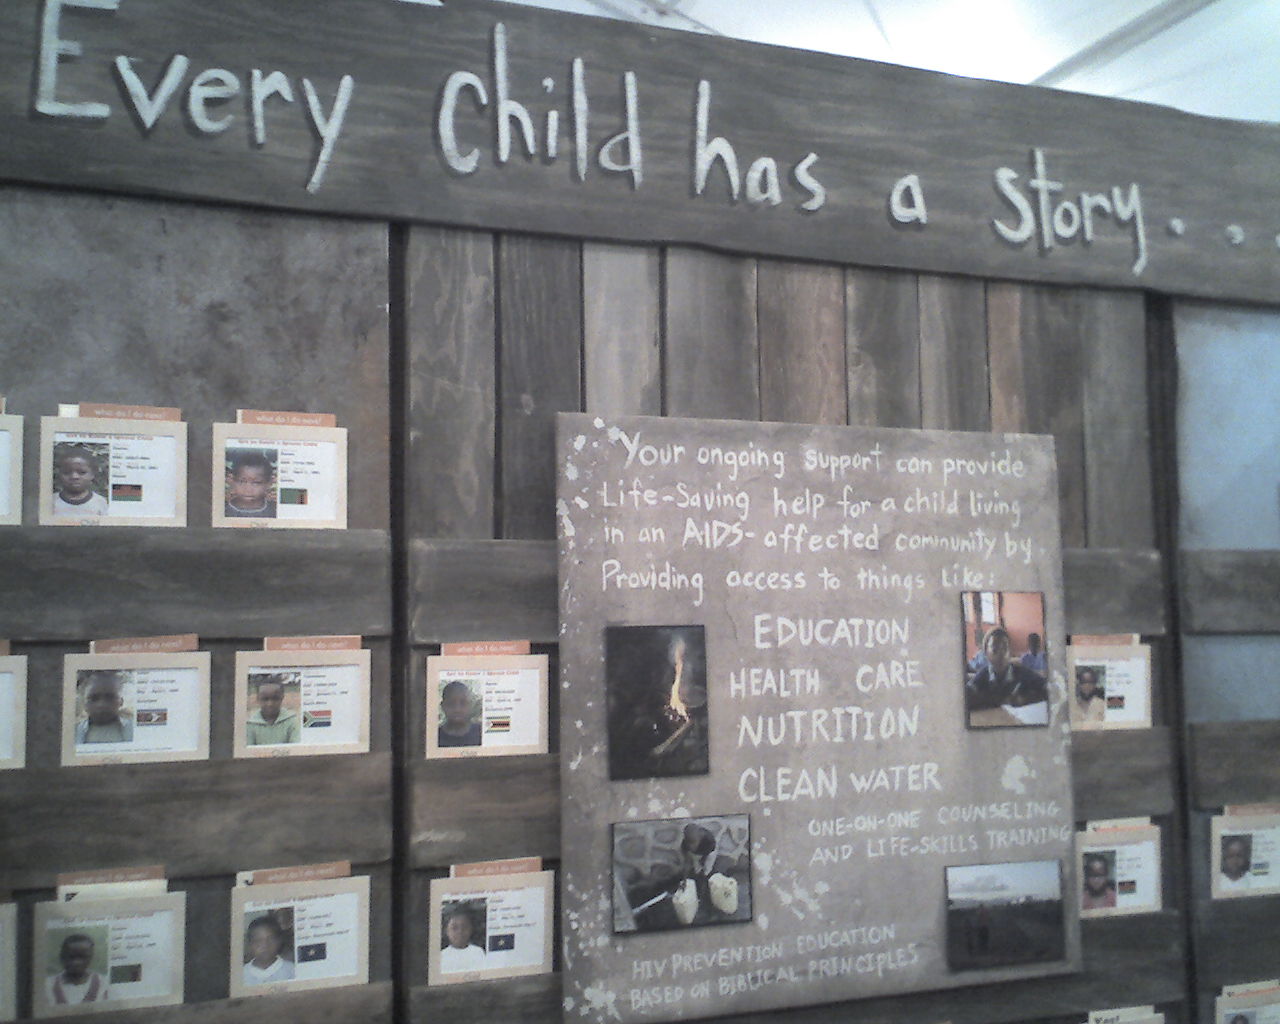 Every child has a story